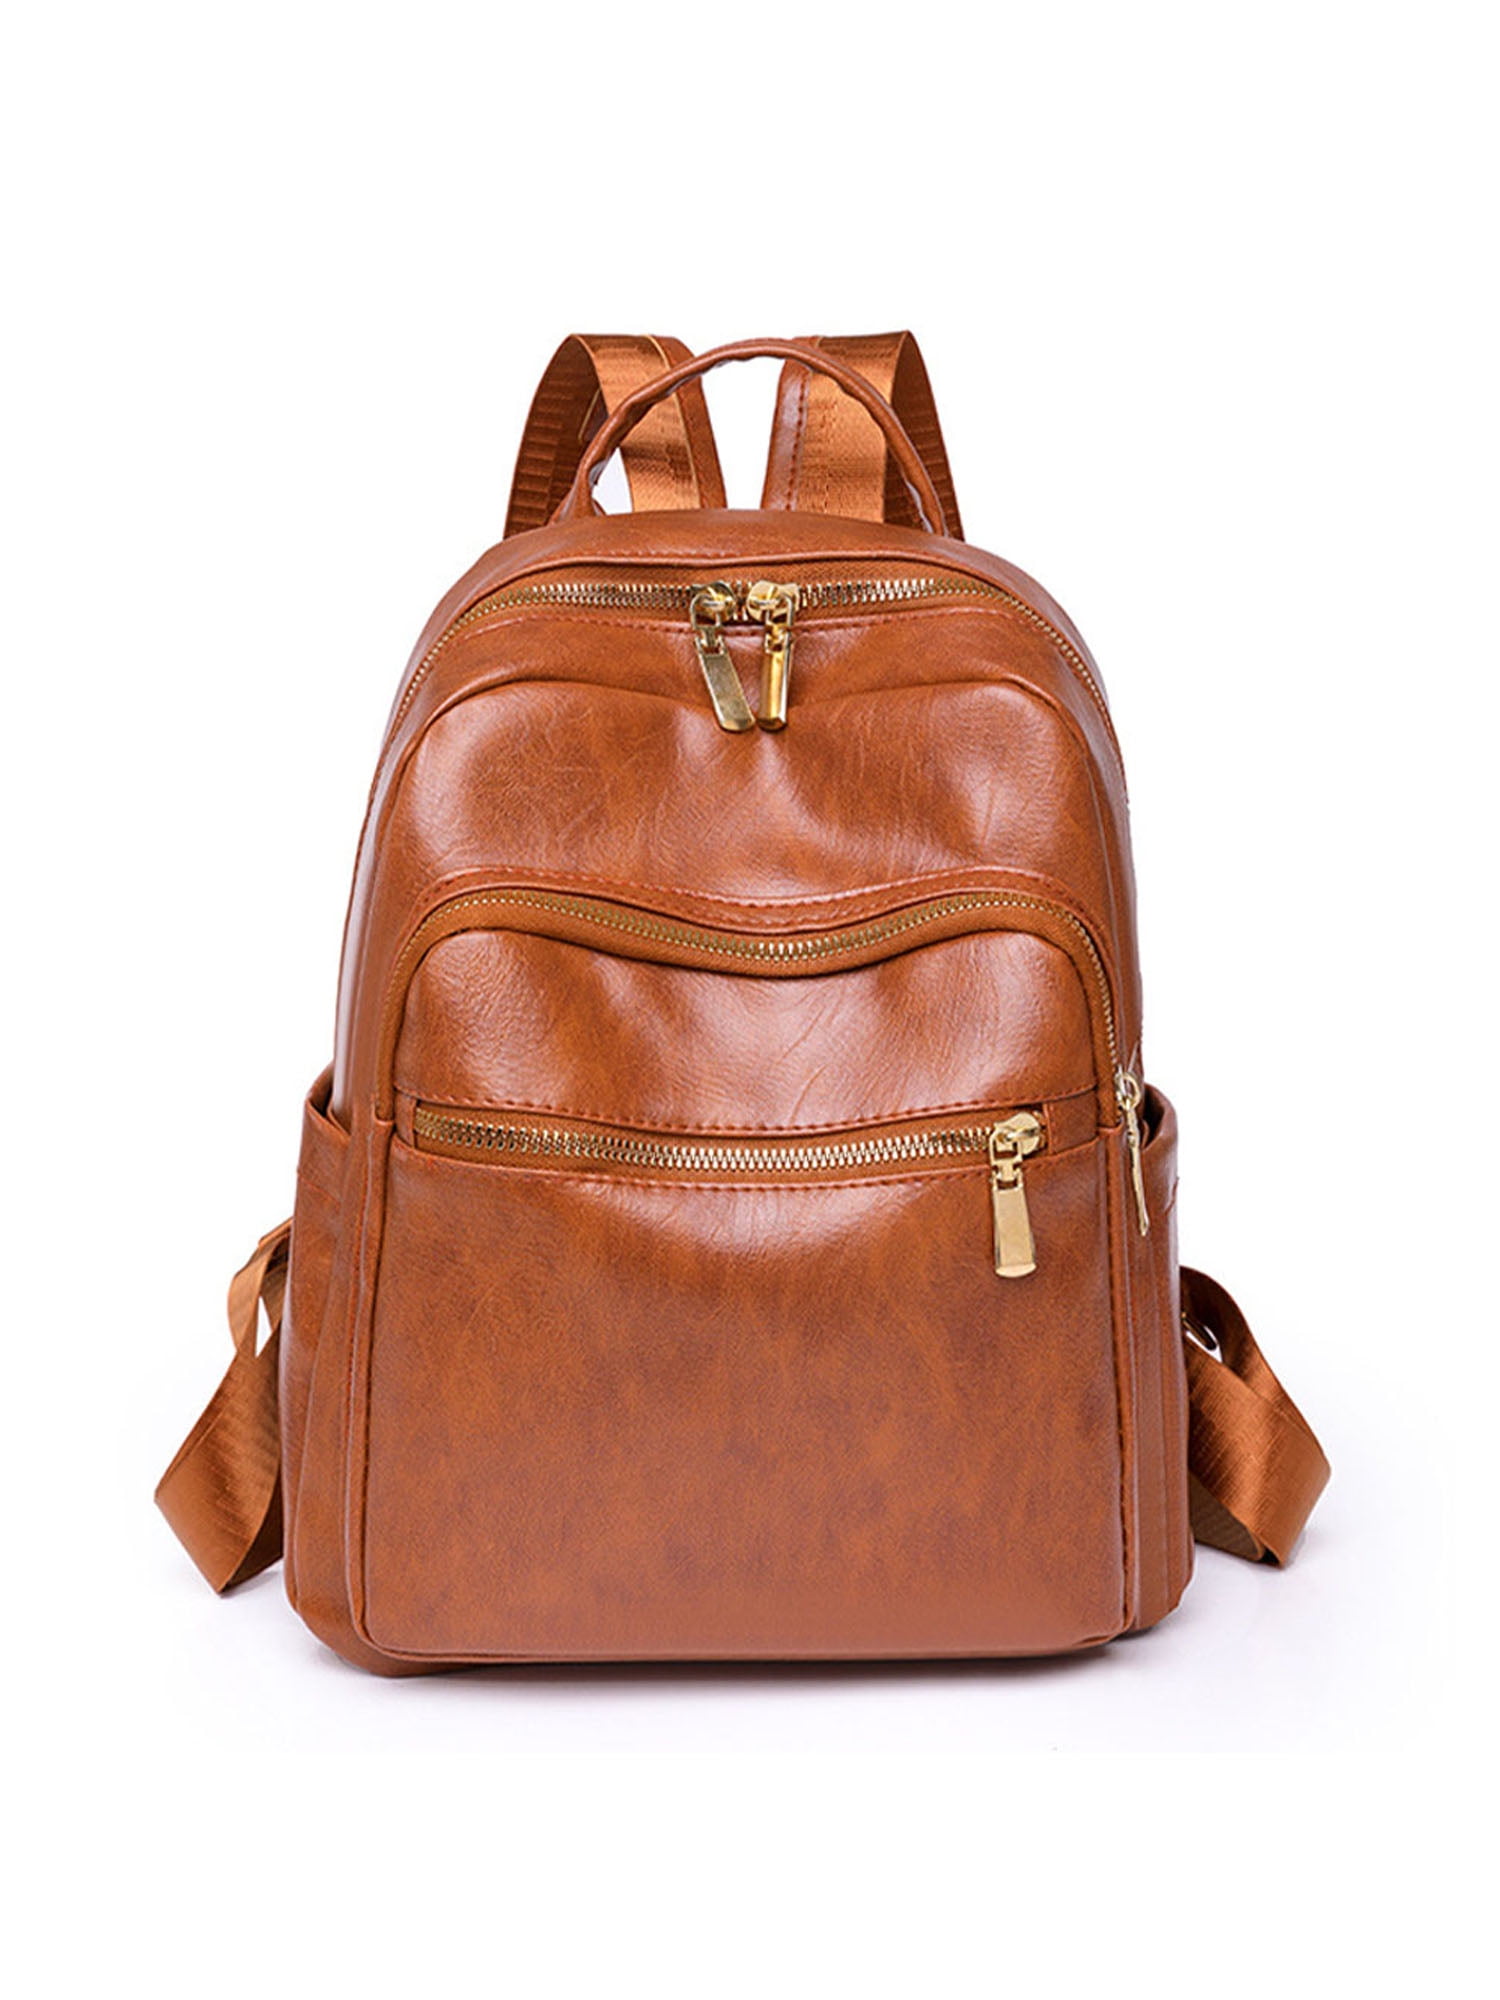 ZNT BAGS Dark brown handmade leather backpack bag for unisex : Amazon.in:  Fashion